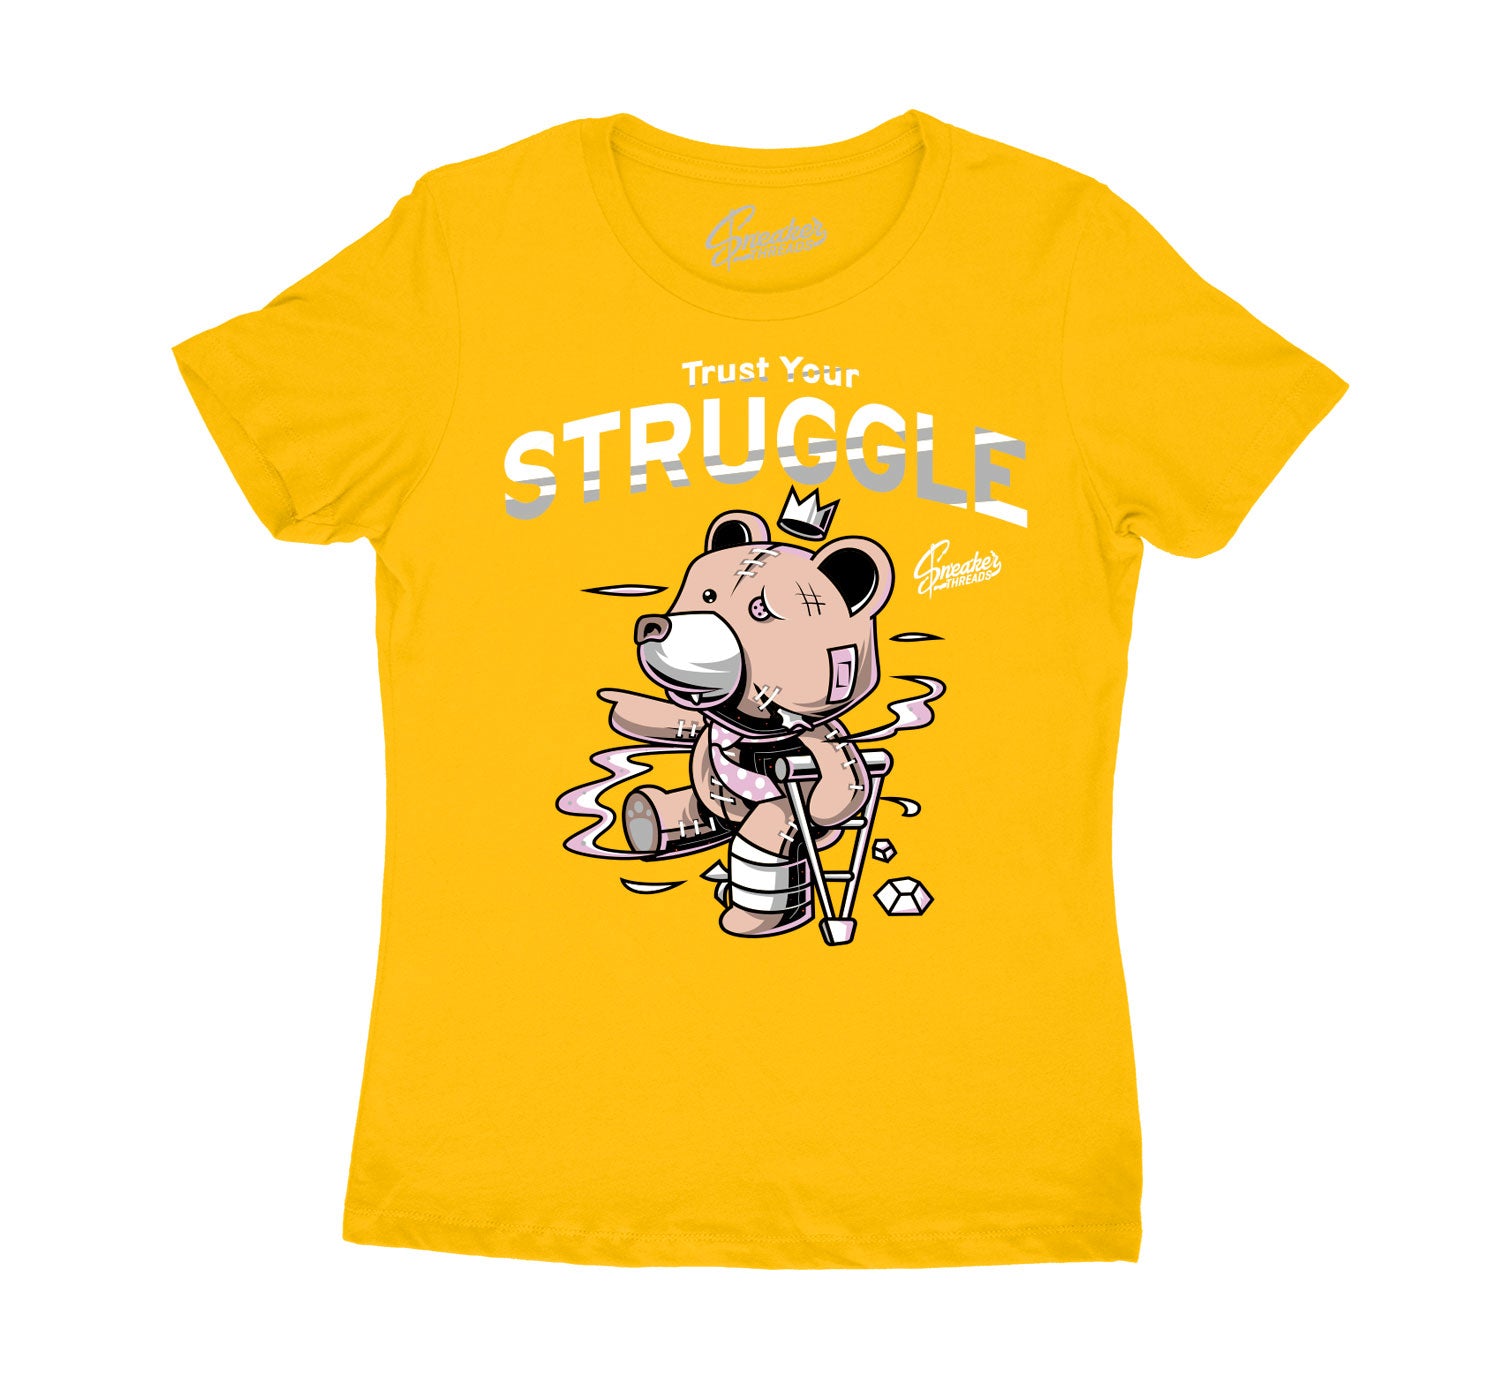 Womens Arctic Punch 8 Shirt -Trust Your Struggle - Yellow